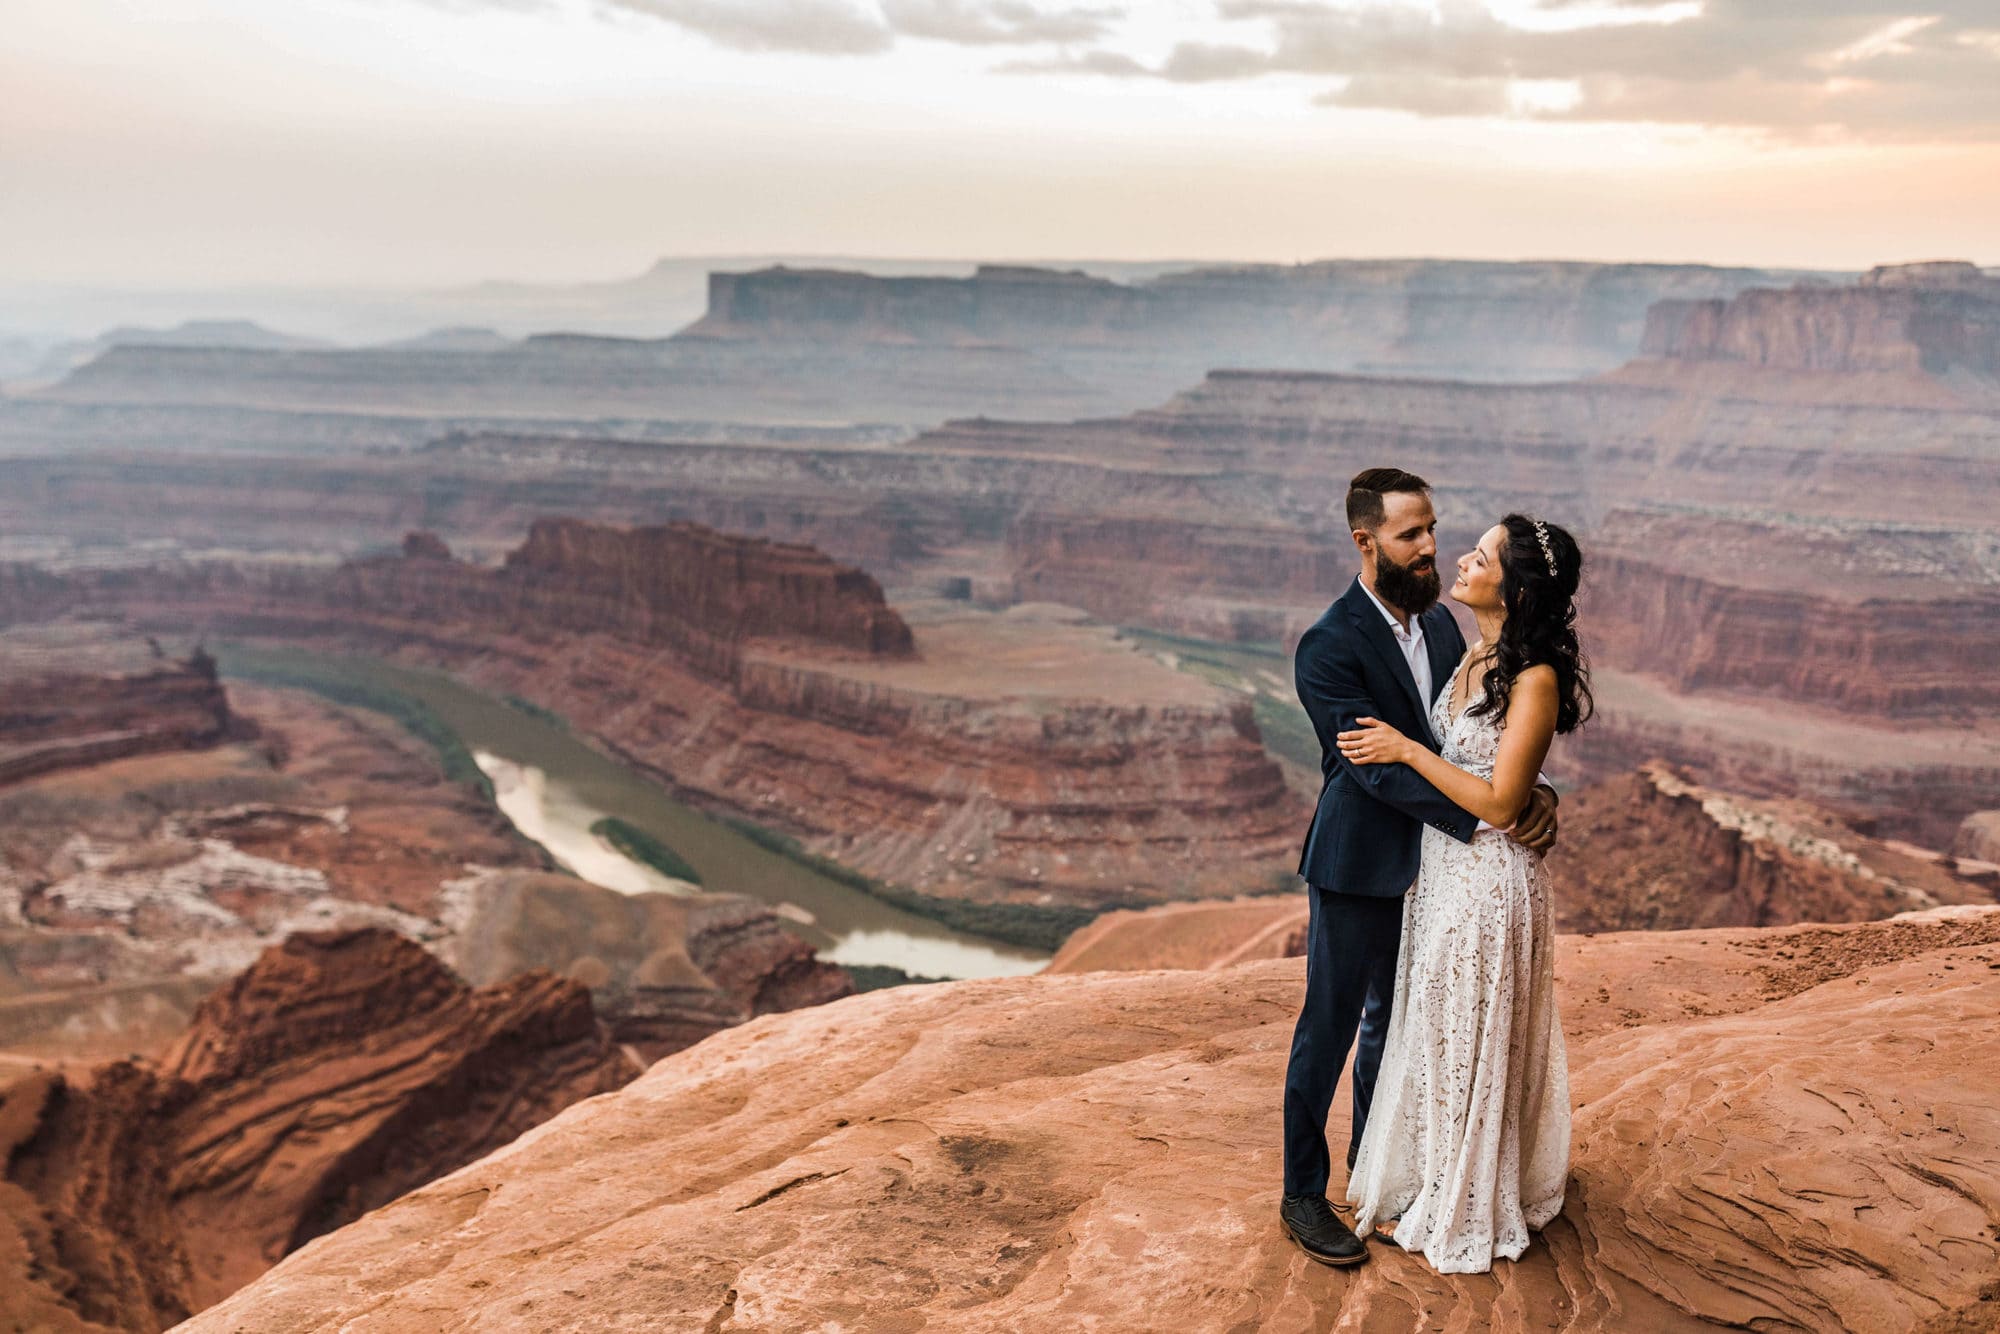 Moab is so the best place for an elopement. Check out this Moab elopement planning guide for all the info you'll need to plan your elopement adventure.